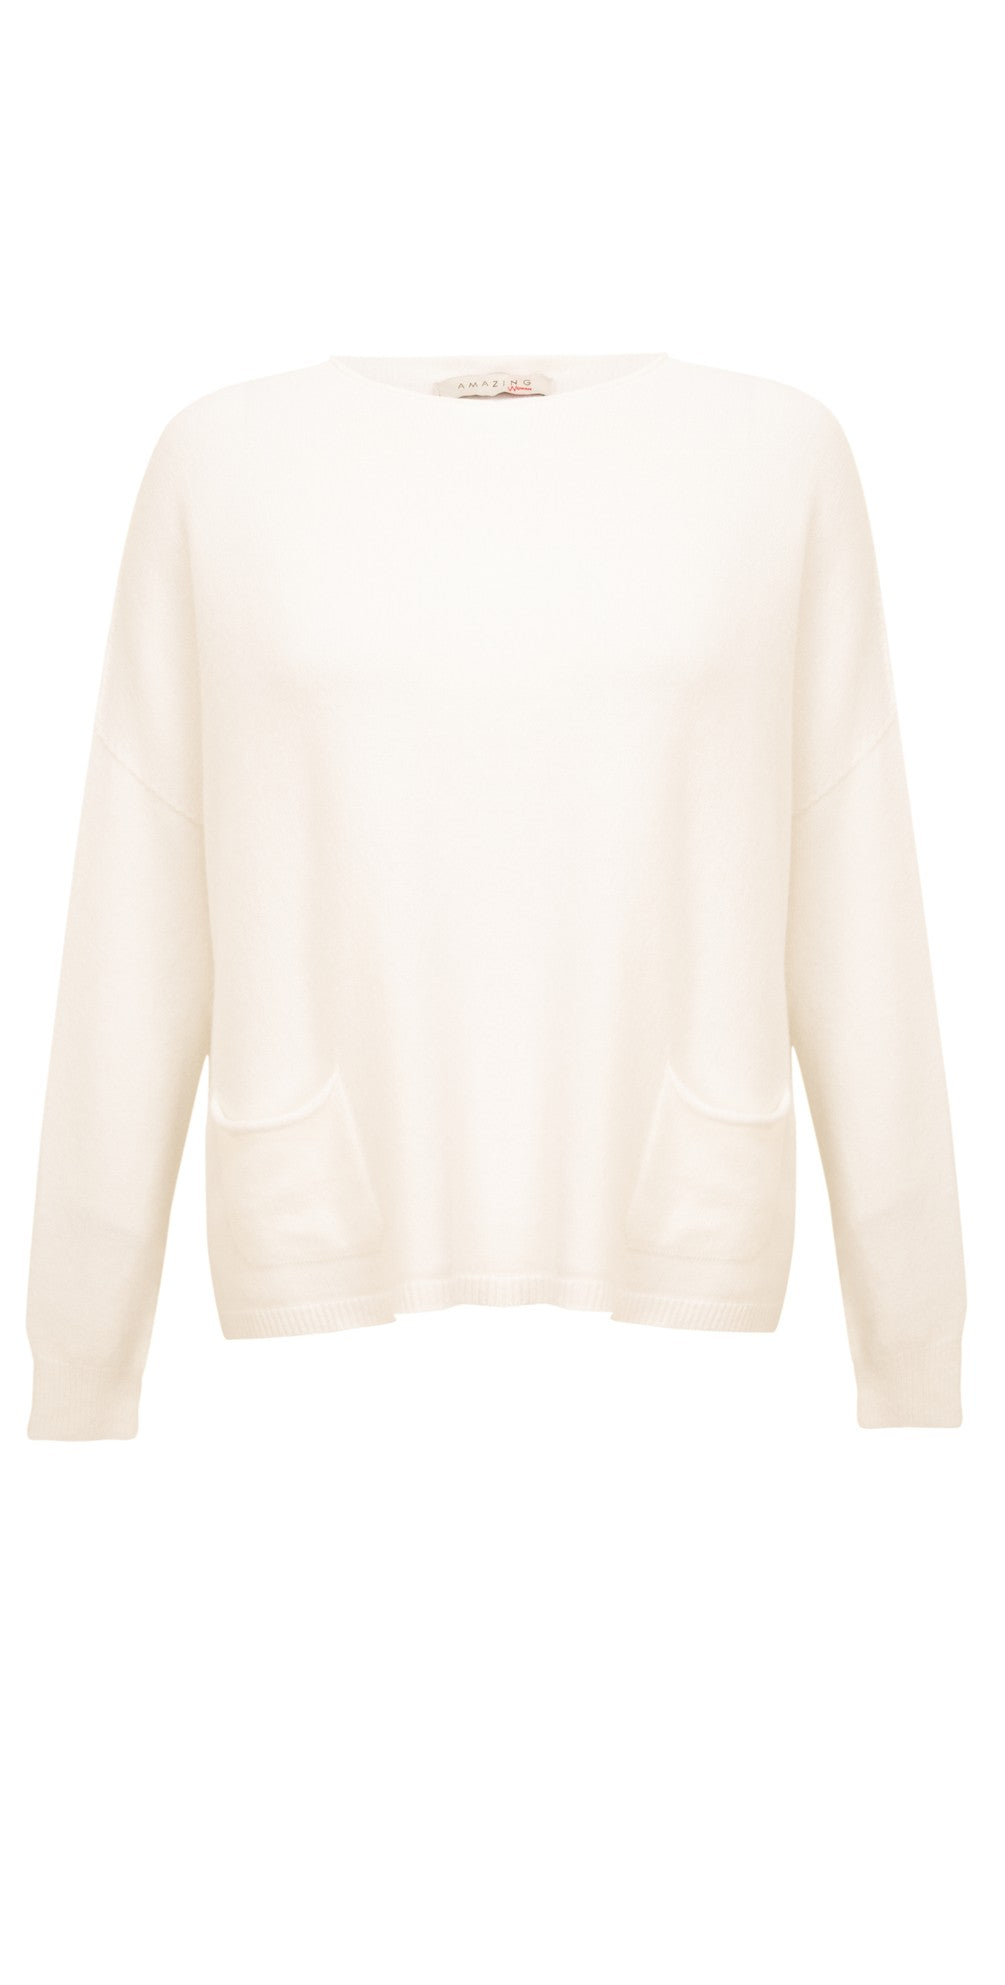 Ivory boat neck sweater with two front pockets